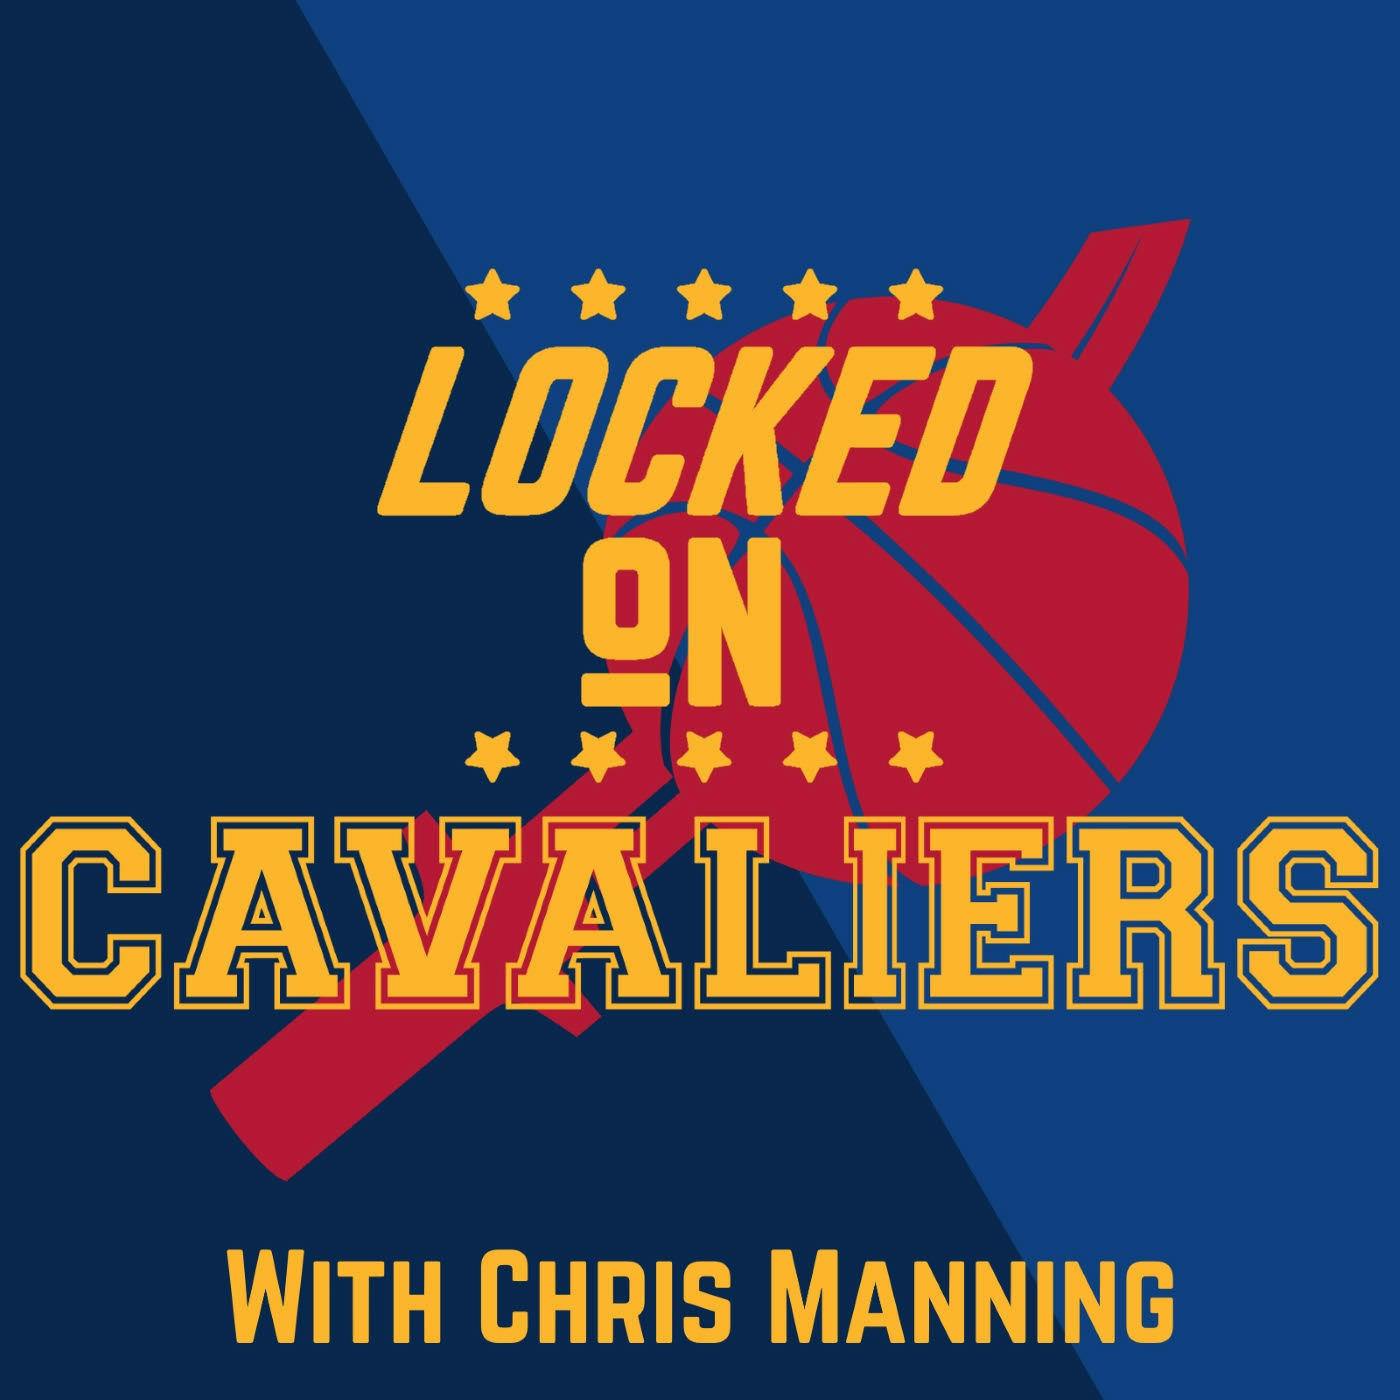 Locked on Cavaliers - Oct. 25, 2017 - Recapping the Cavs' 119-112 win over the Bulls